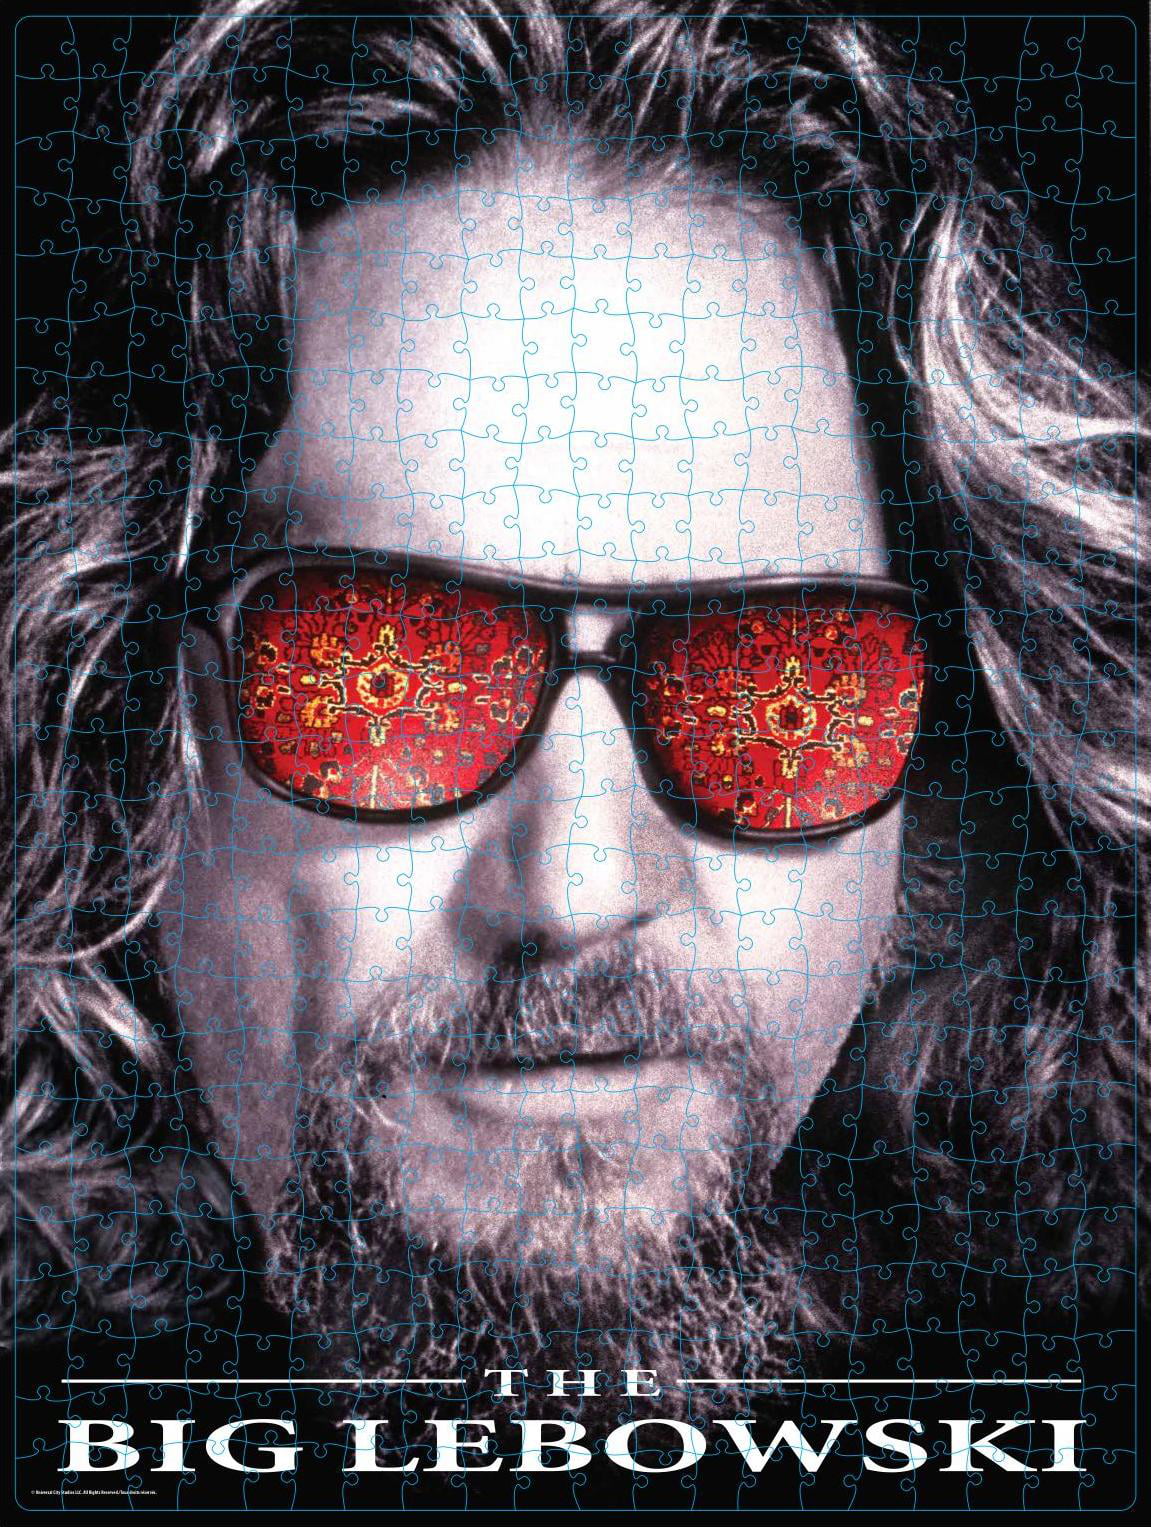 Details about   RARE NEW SEALED Big Lebowski 500 Piece Blockbuster Jigsaw Poster Puzzle 18"x24" 